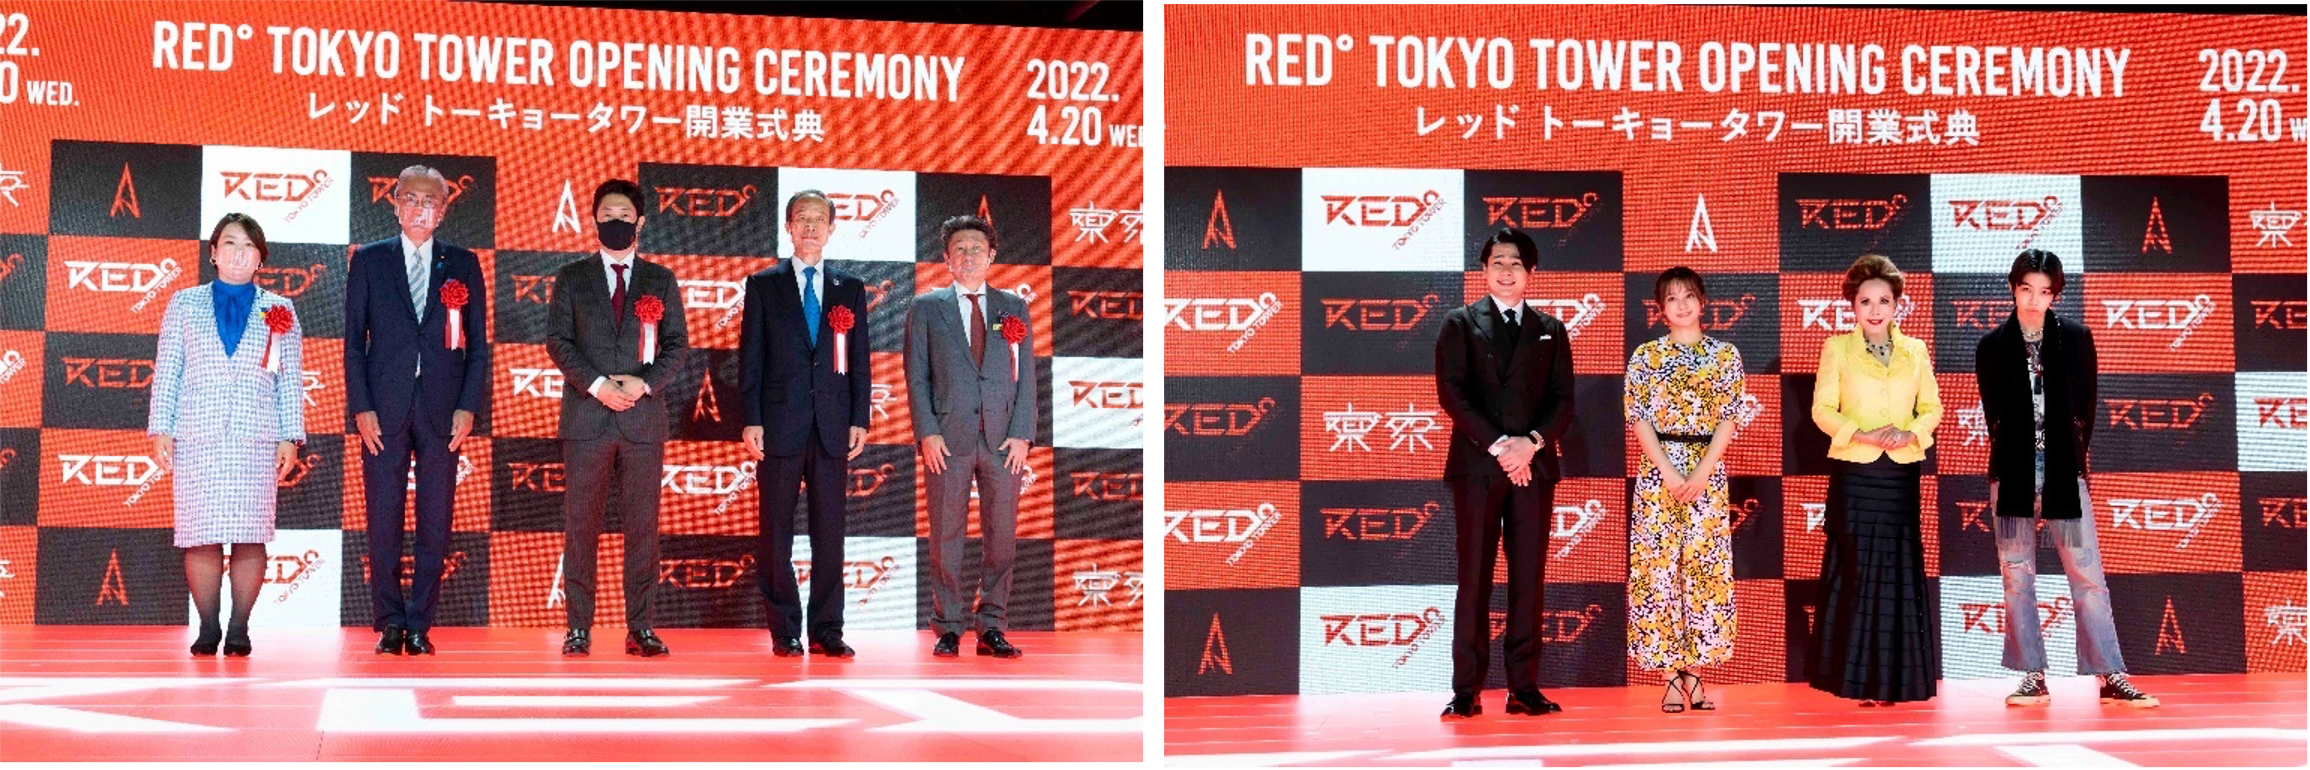 『RED°TOKYO TOWER OPENING CEREMONY』を開催